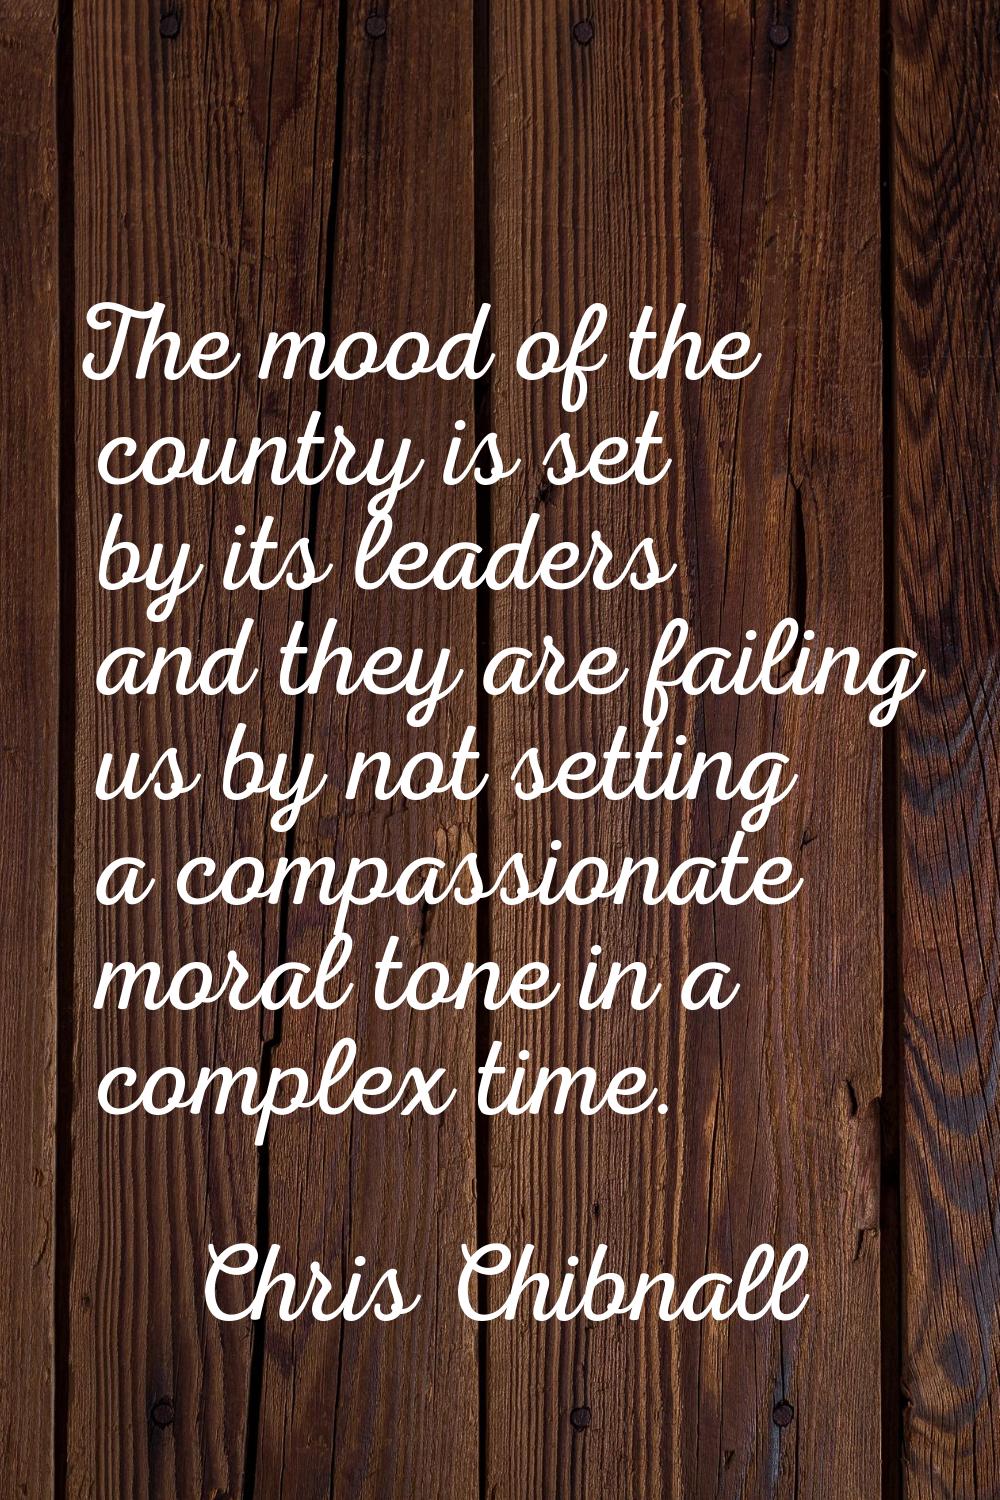 The mood of the country is set by its leaders and they are failing us by not setting a compassionat